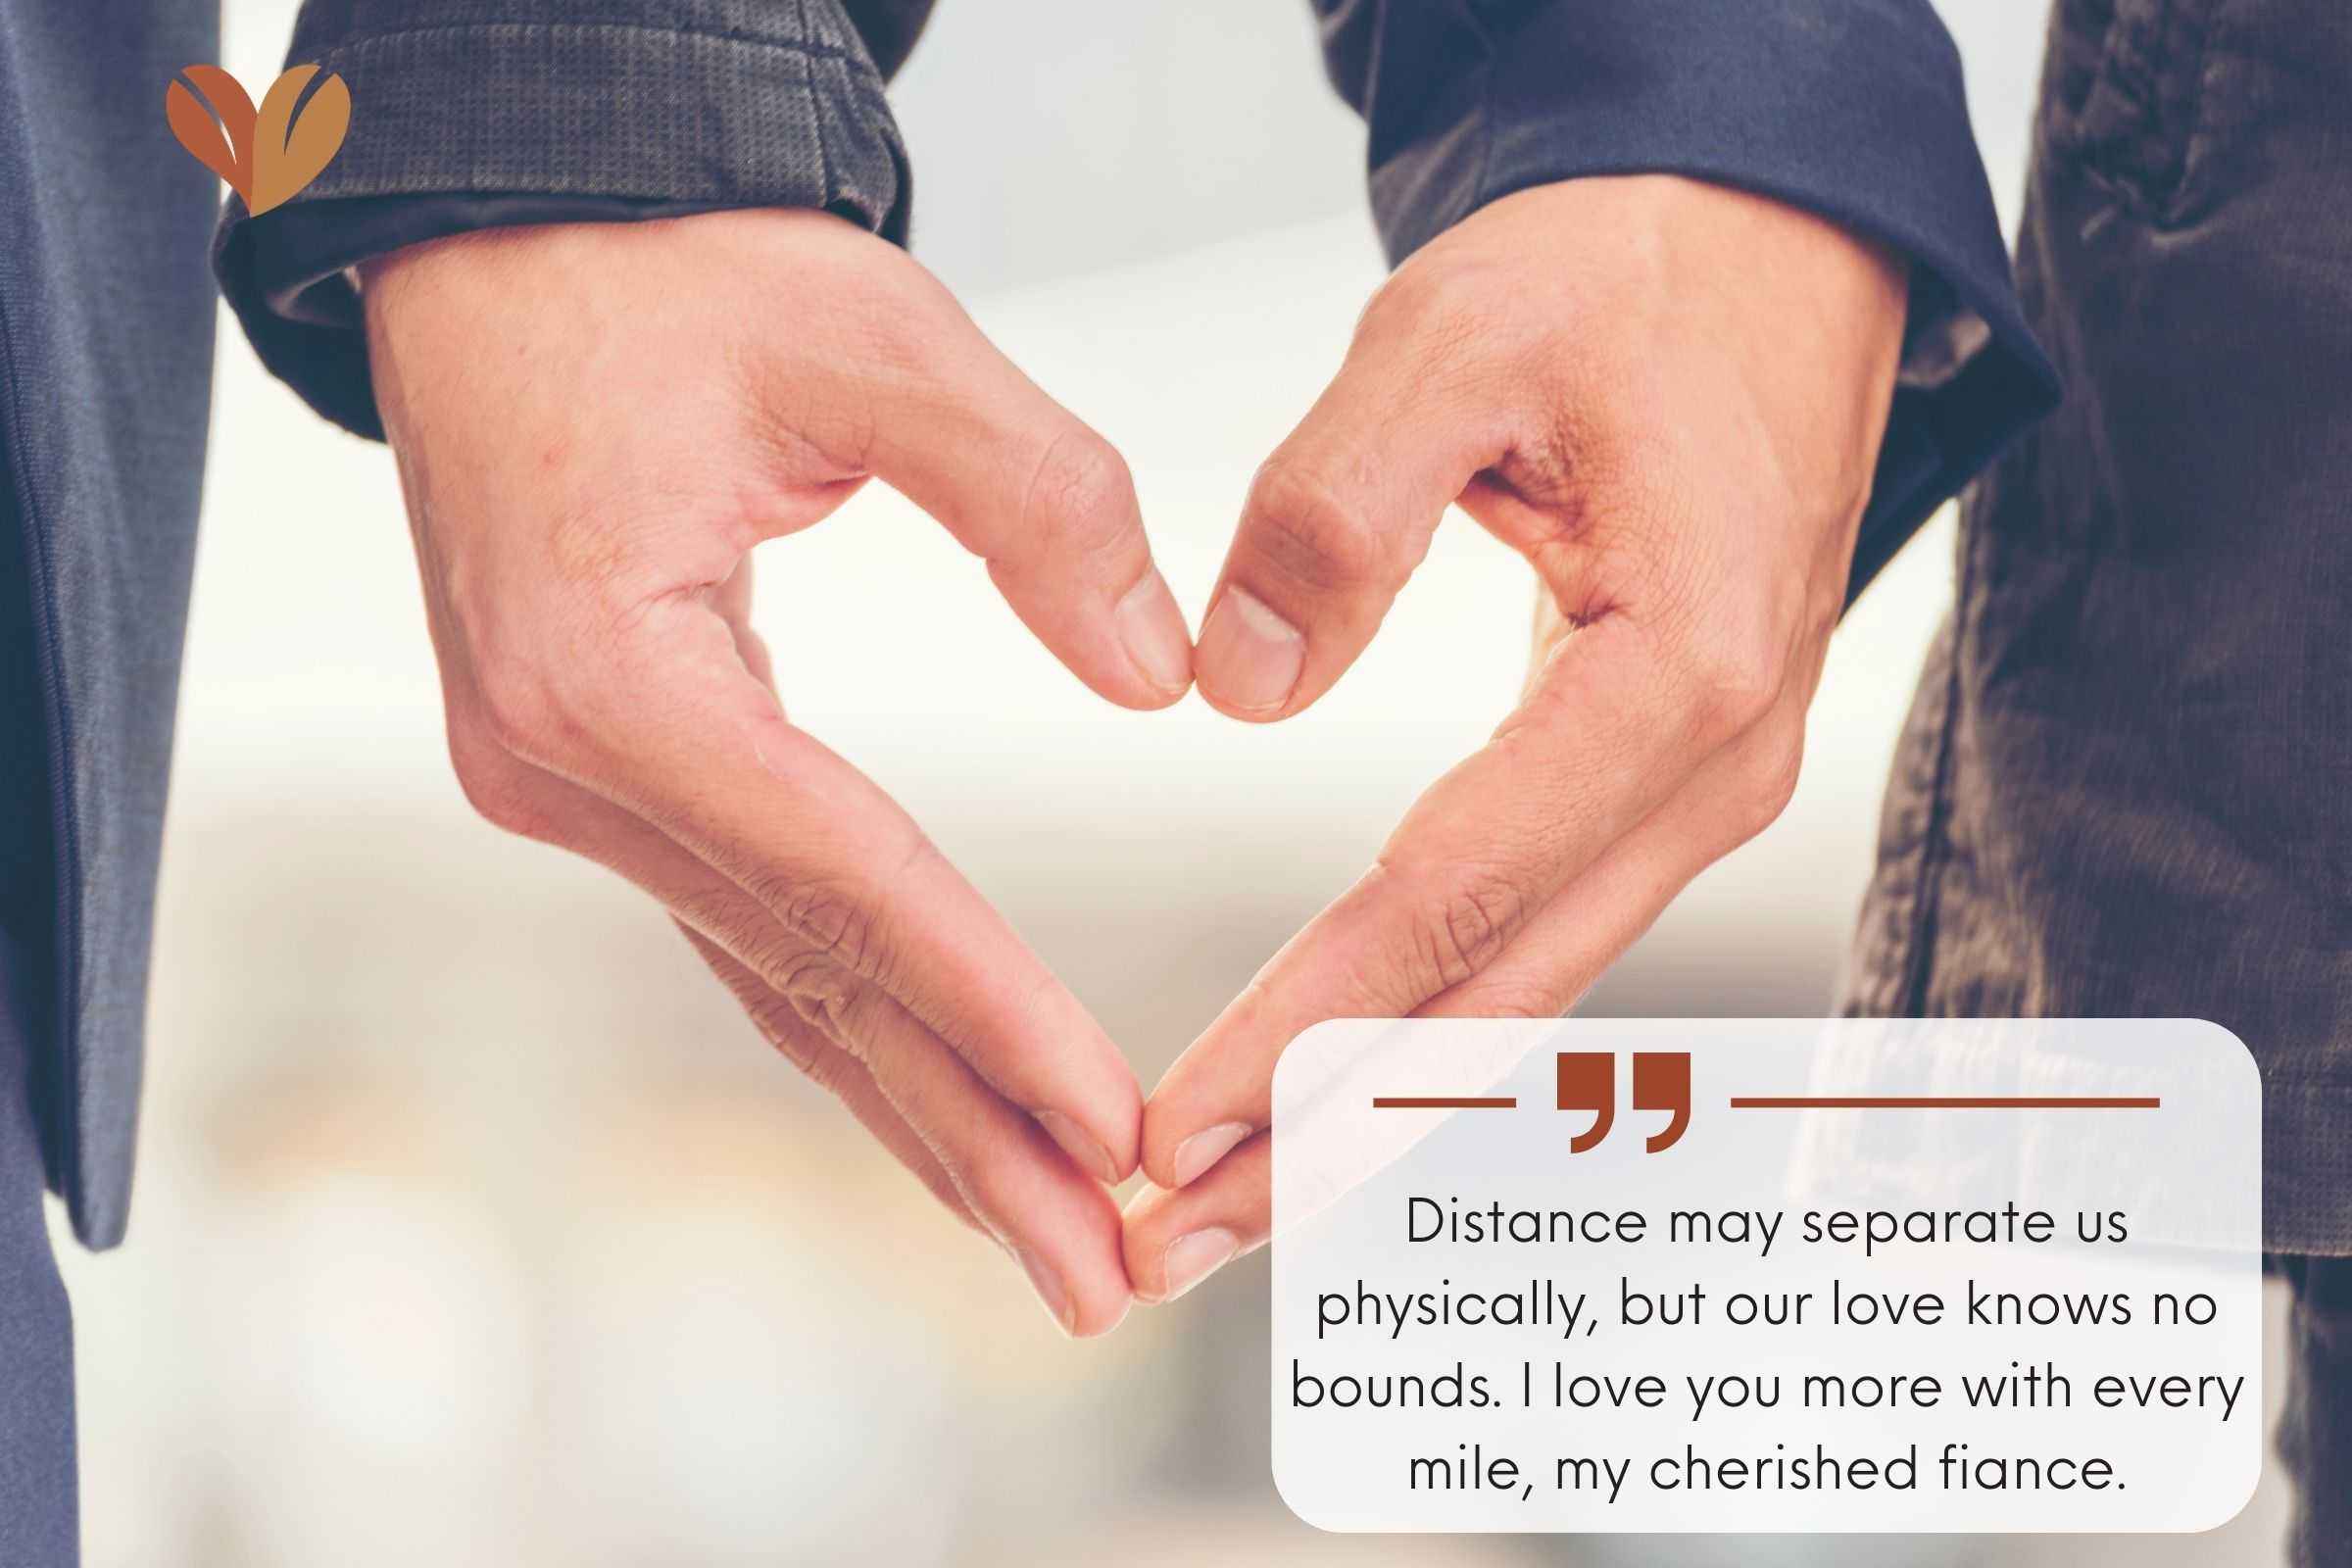 Distance may separate us physically, but our love knows no bounds. I love you more with every mile, my cherished fiance.